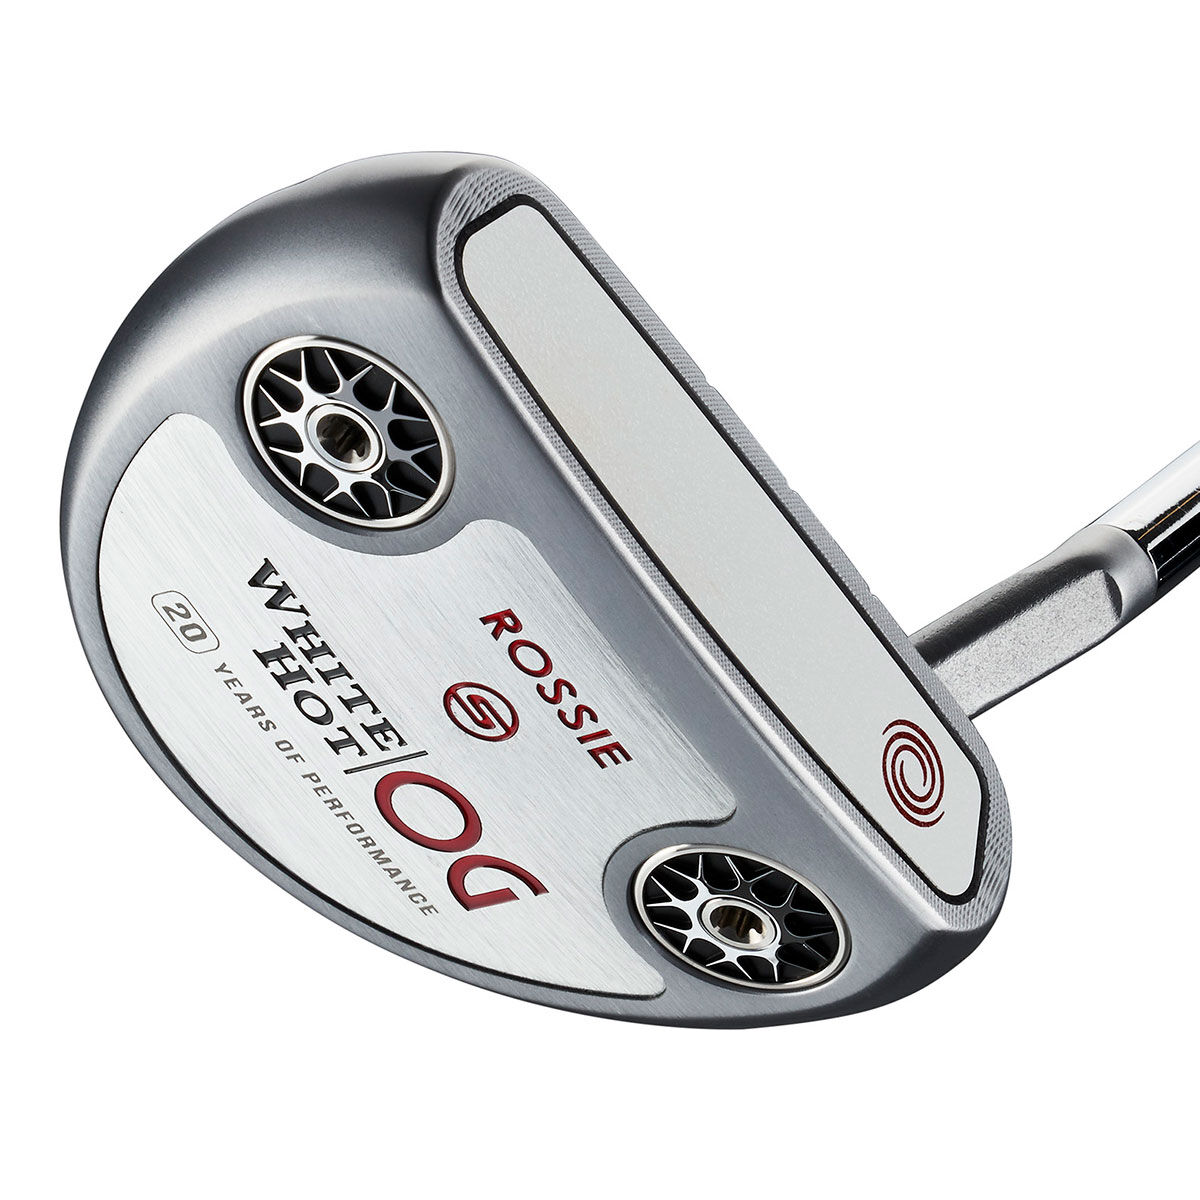 Golf Putter Odyssey White Hot OG Rossie S OS, homme, Main Droite, 34 pouces | Online Golf